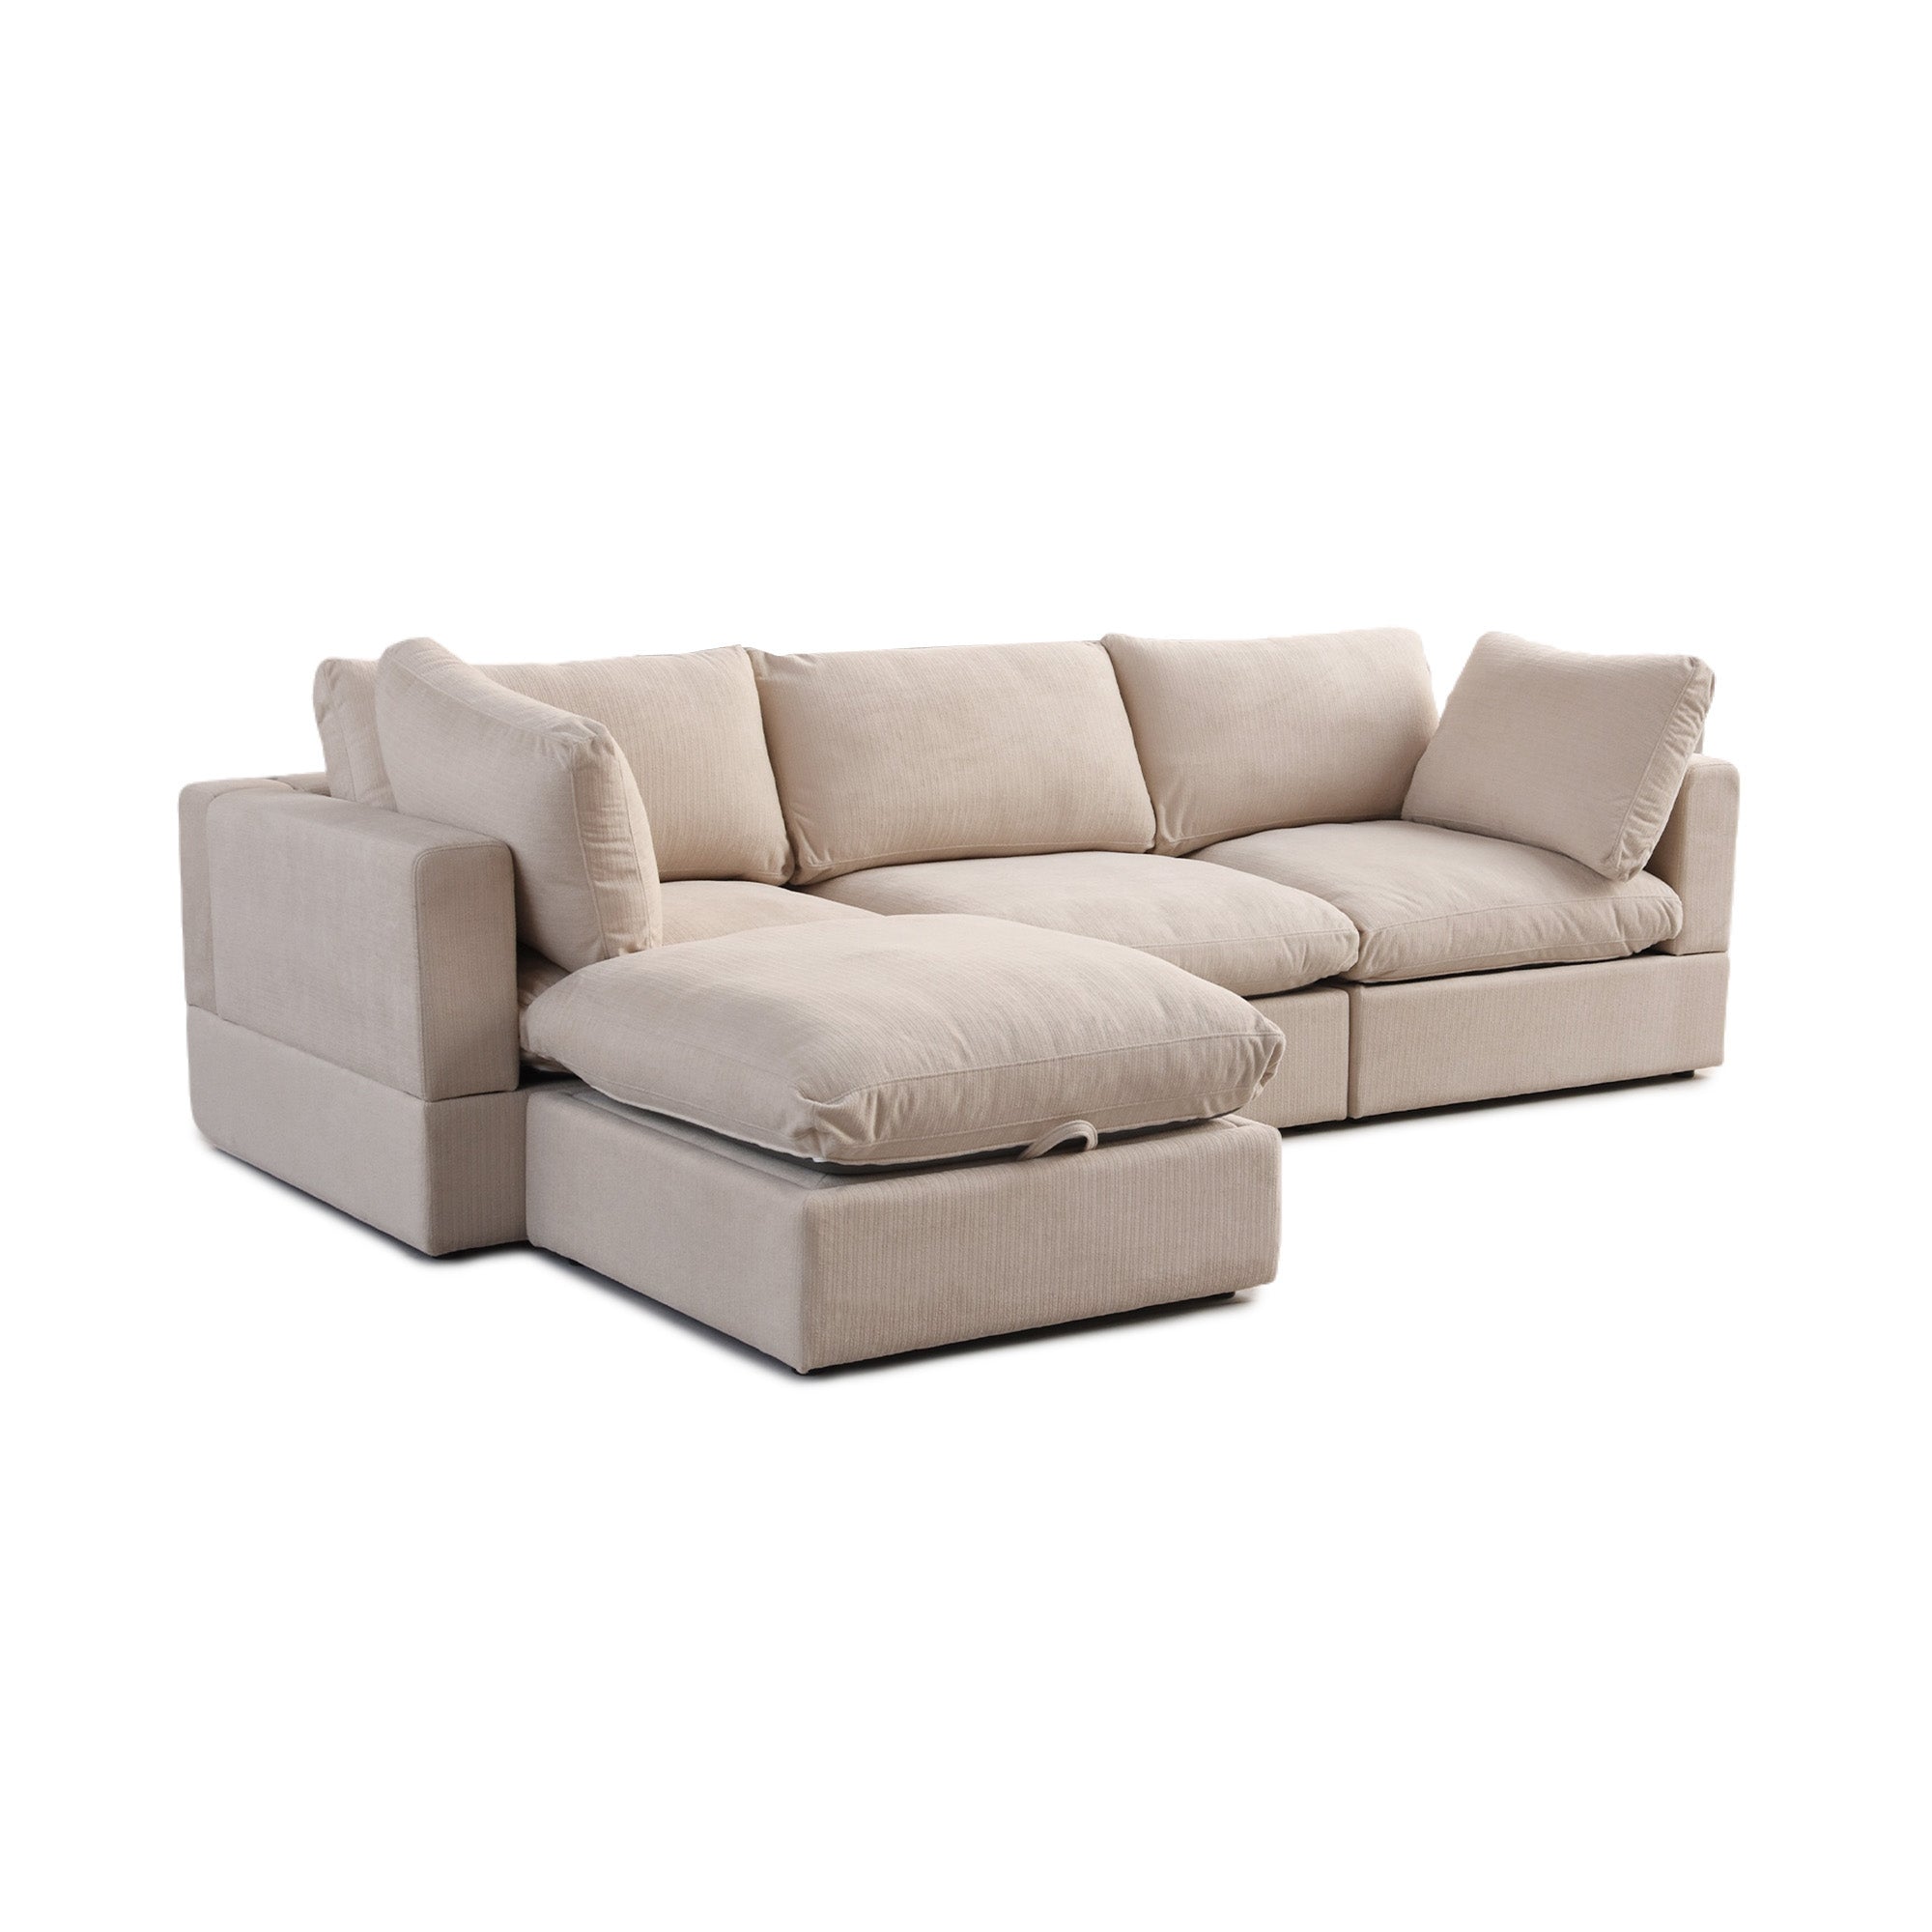 The 4 Piece Comfy Cloud Couch